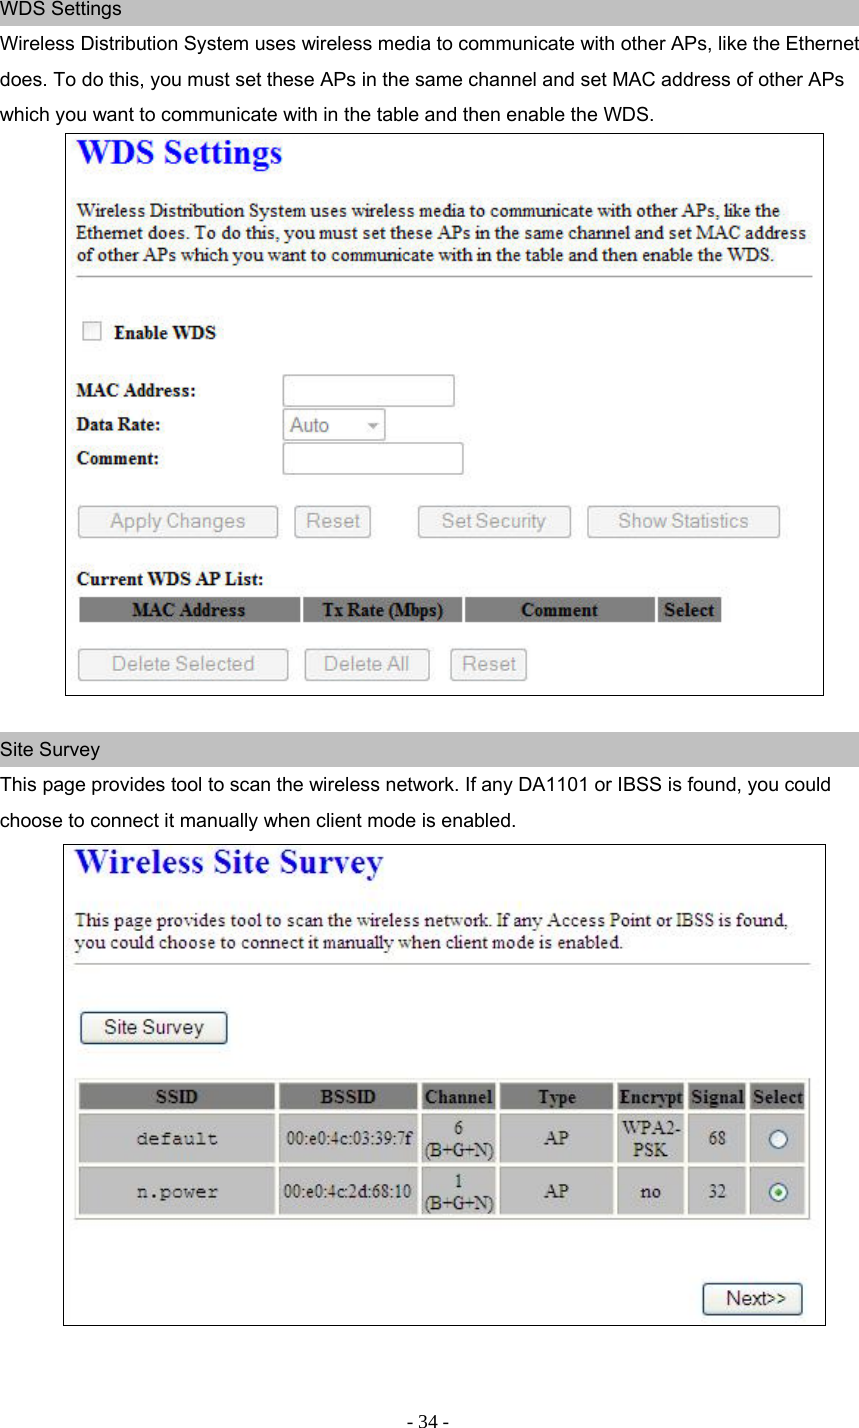 - 34 - WDS Settings Wireless Distribution System uses wireless media to communicate with other APs, like the Ethernet does. To do this, you must set these APs in the same channel and set MAC address of other APs which you want to communicate with in the table and then enable the WDS.   Site Survey This page provides tool to scan the wireless network. If any DA1101 or IBSS is found, you could choose to connect it manually when client mode is enabled.    